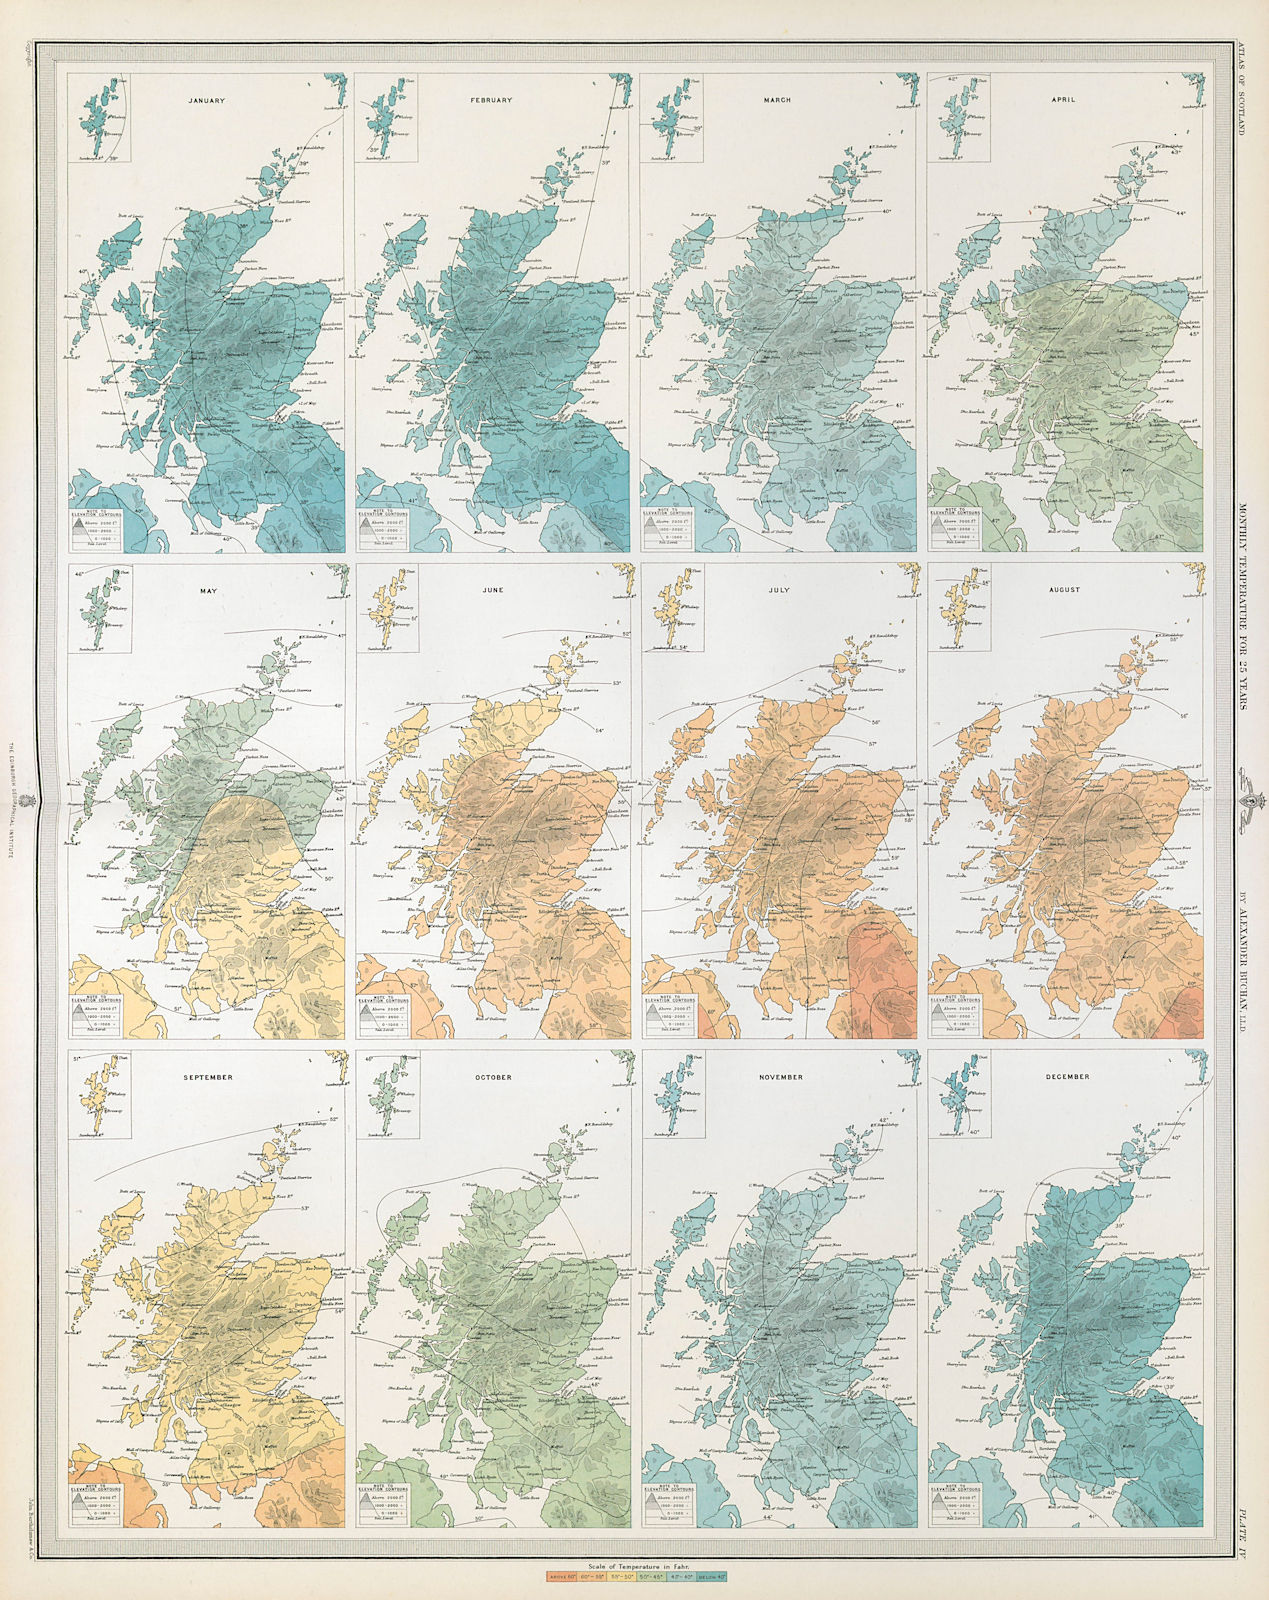 Associate Product SCOTLAND average monthly temperature for 25 years by Alexander Buchan 1895 map